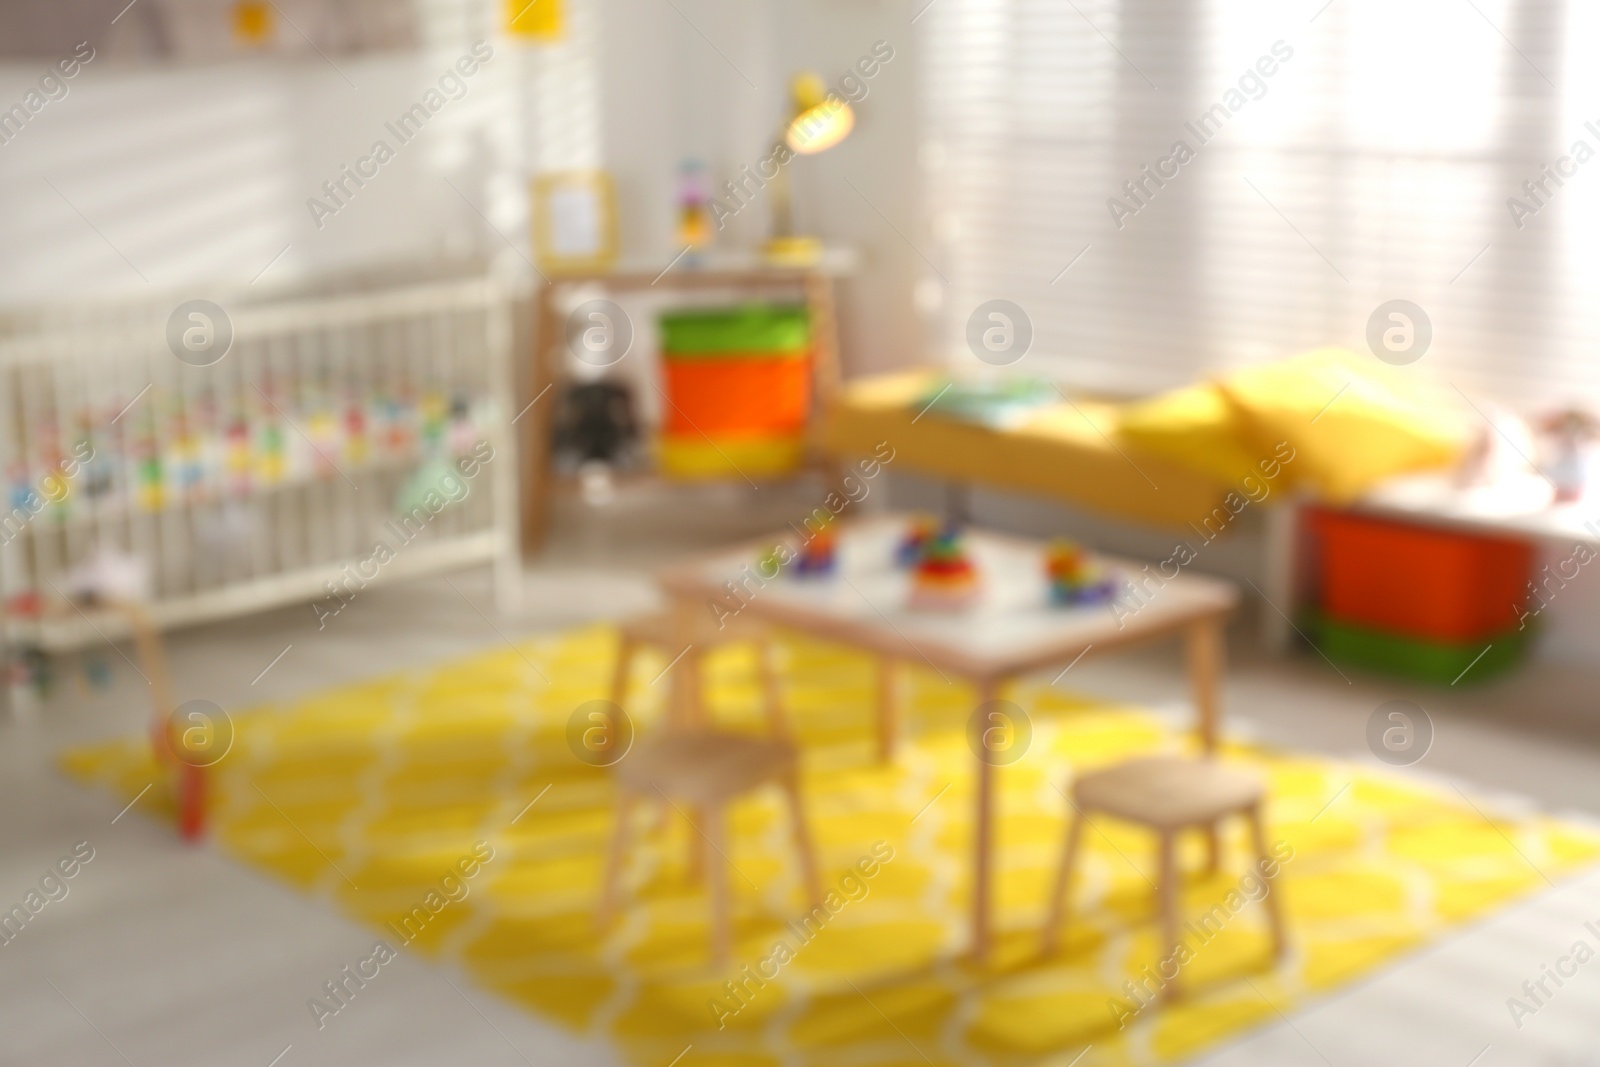 Photo of Blurred view of cozy baby room interior